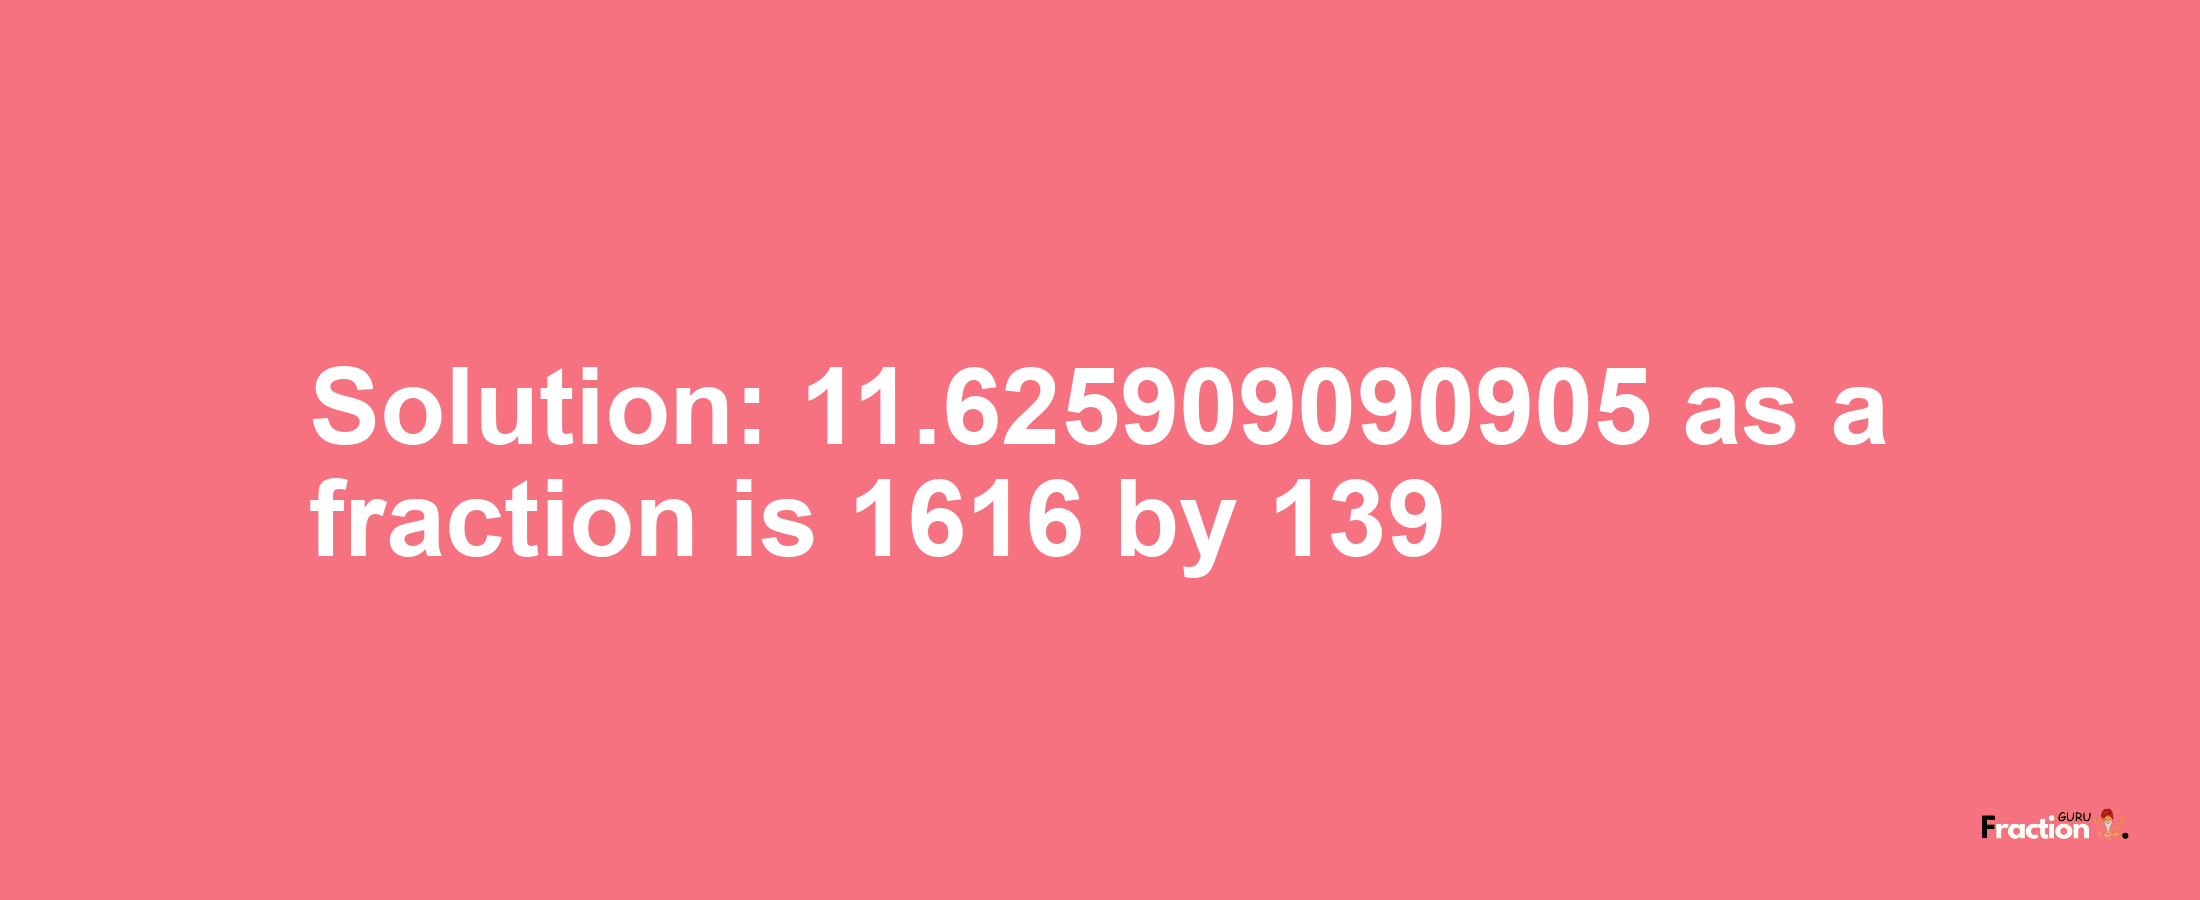 Solution:11.625909090905 as a fraction is 1616/139